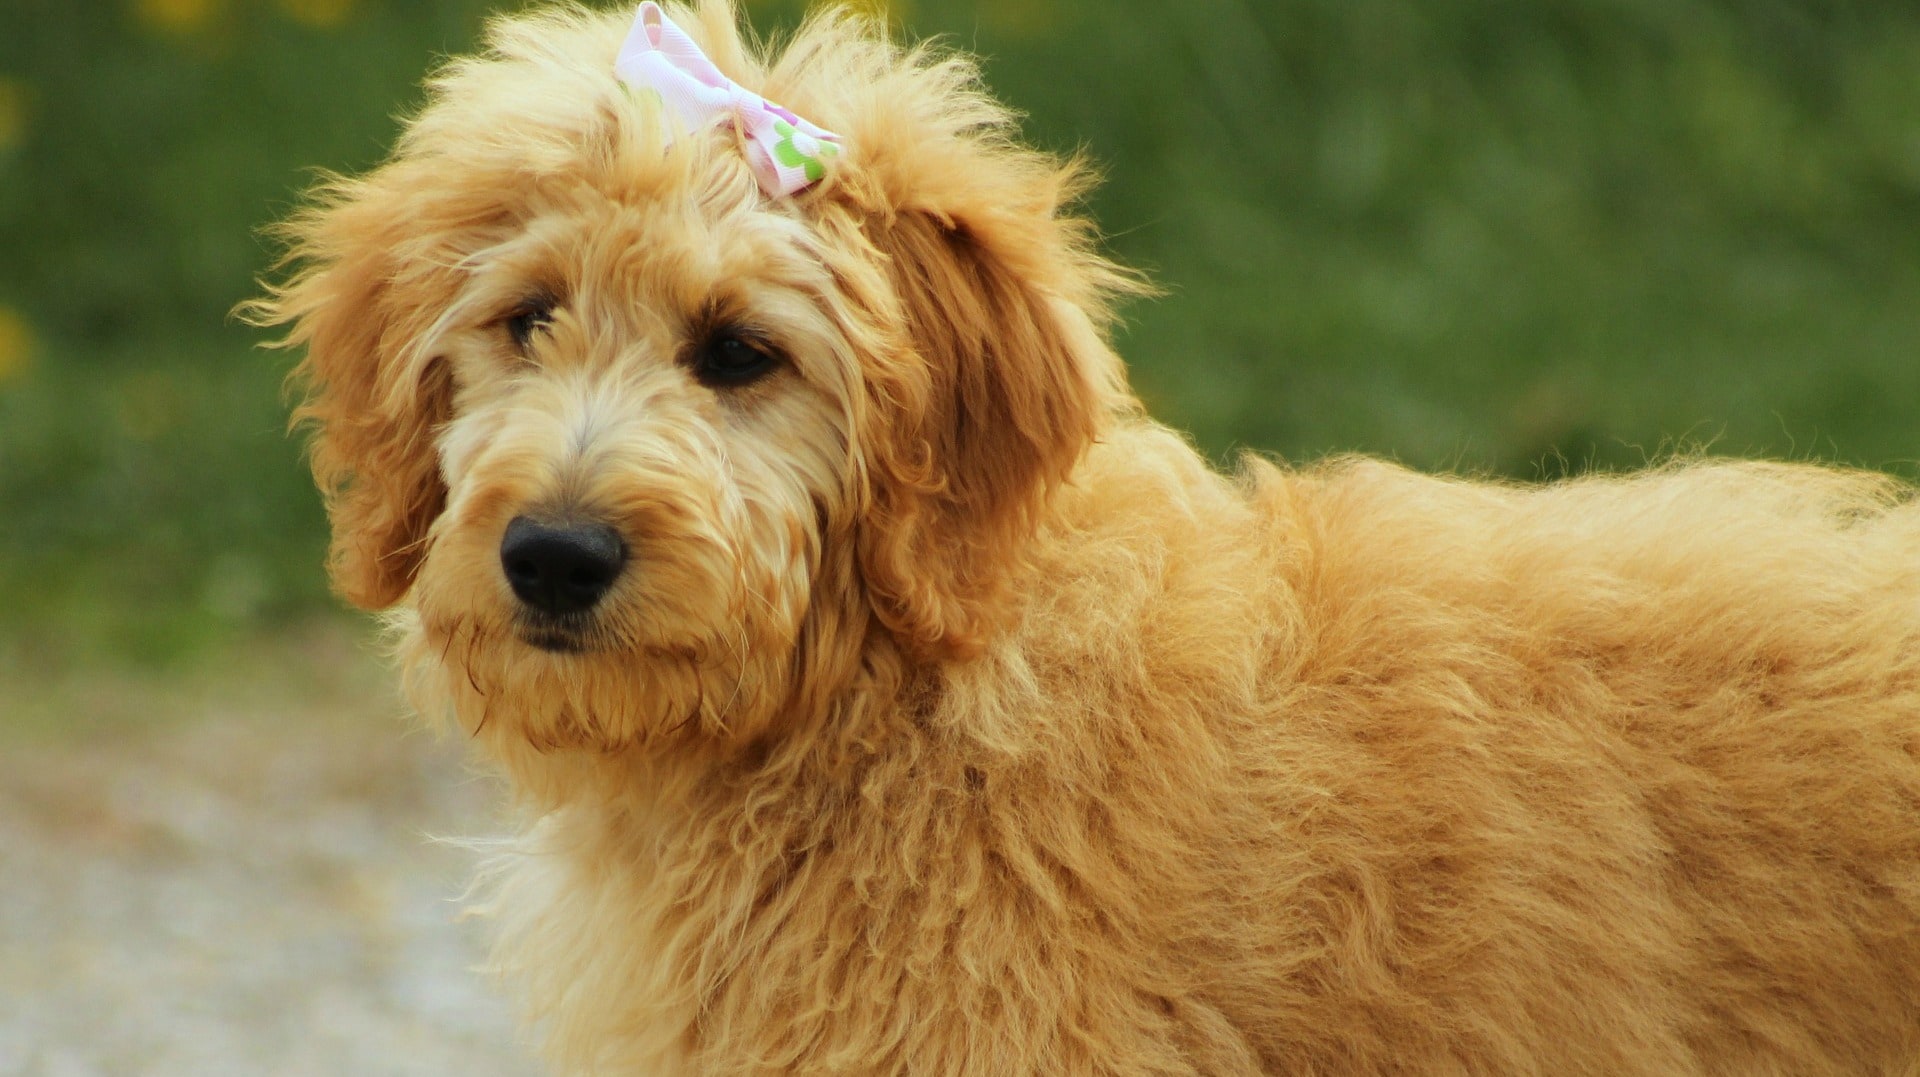 These trendy designer dog breeds will set you back thousands of dollars